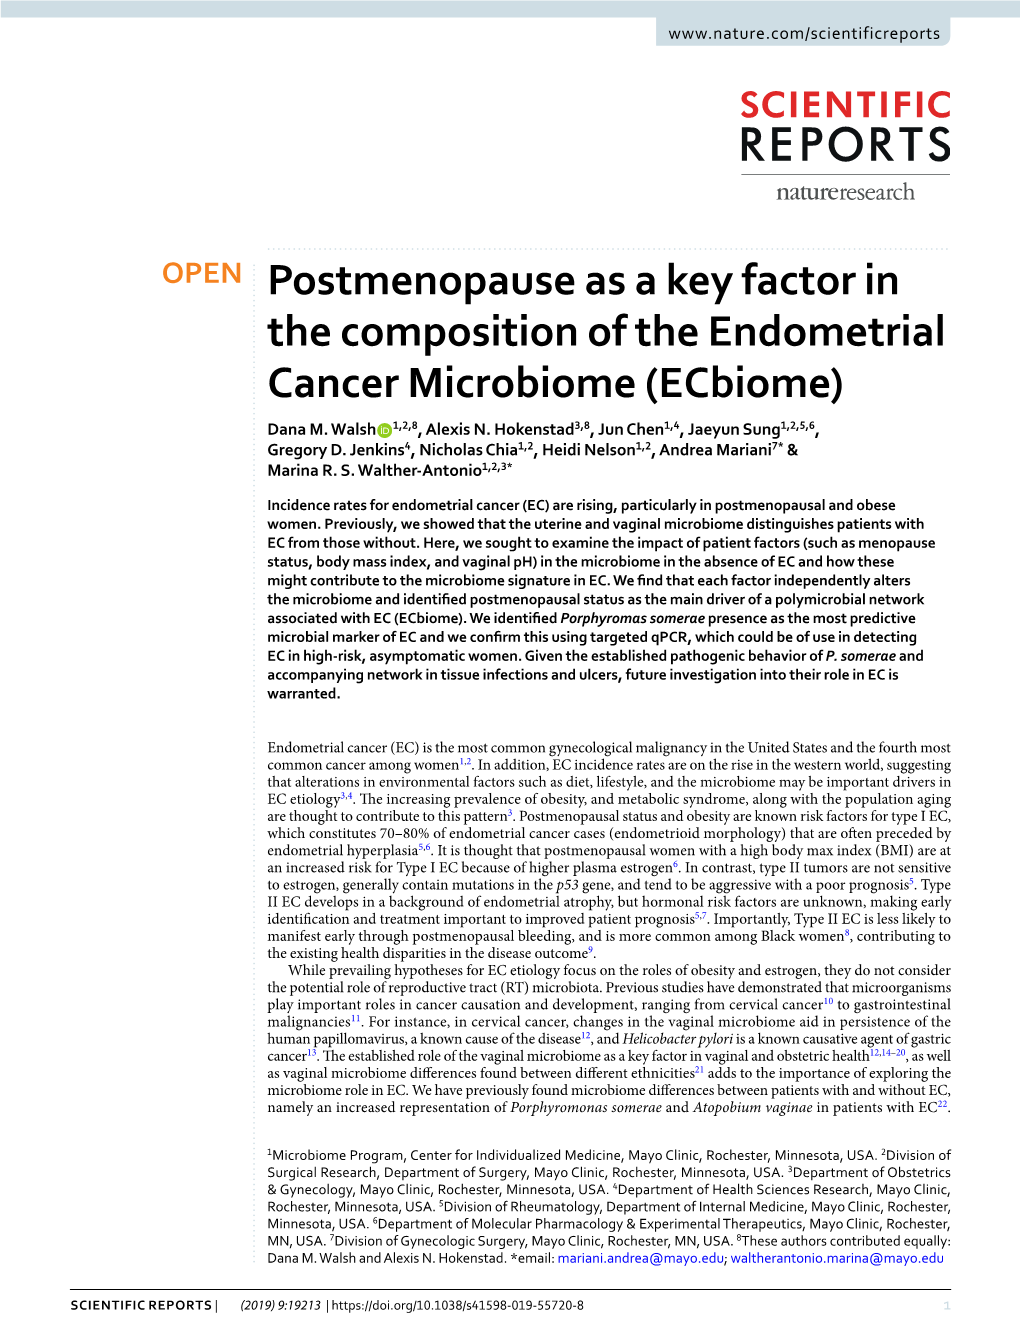 Postmenopause As a Key Factor in the Composition of the Endometrial Cancer Microbiome (Ecbiome) Dana M